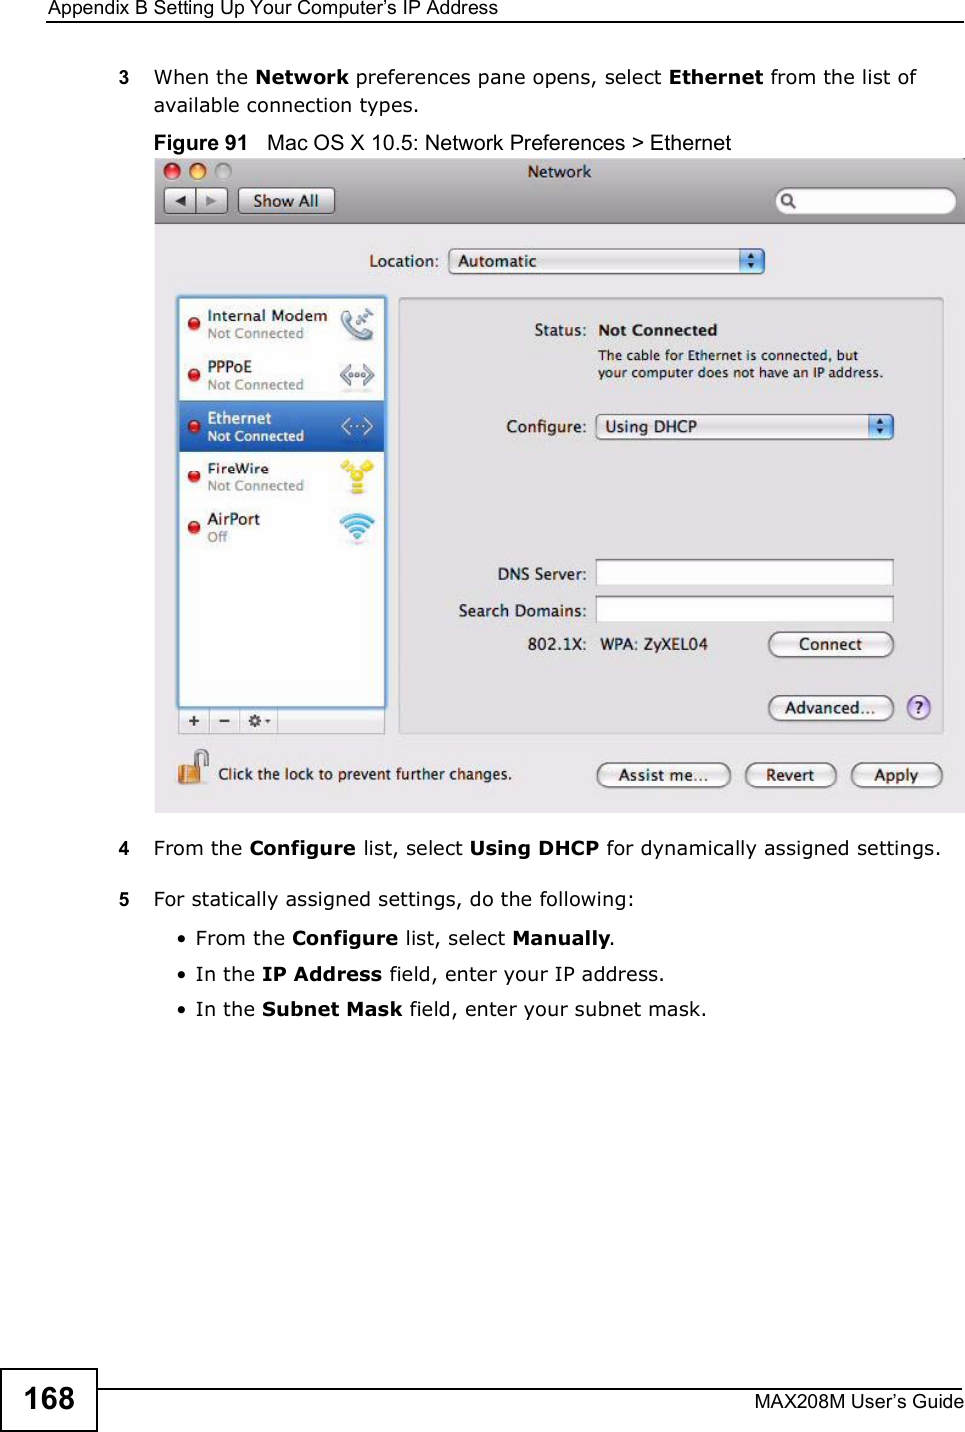 Appendix BSetting Up Your Computer s IP AddressMAX208M User s Guide1683When the Network preferences pane opens, select Ethernet from the list of available connection types.Figure 91   Mac OS X 10.5: Network Preferences &gt; Ethernet4From the Configure list, select Using DHCP for dynamically assigned settings.5For statically assigned settings, do the following:!From the Configure list, select Manually.!In the IP Address field, enter your IP address.!In the Subnet Mask field, enter your subnet mask.